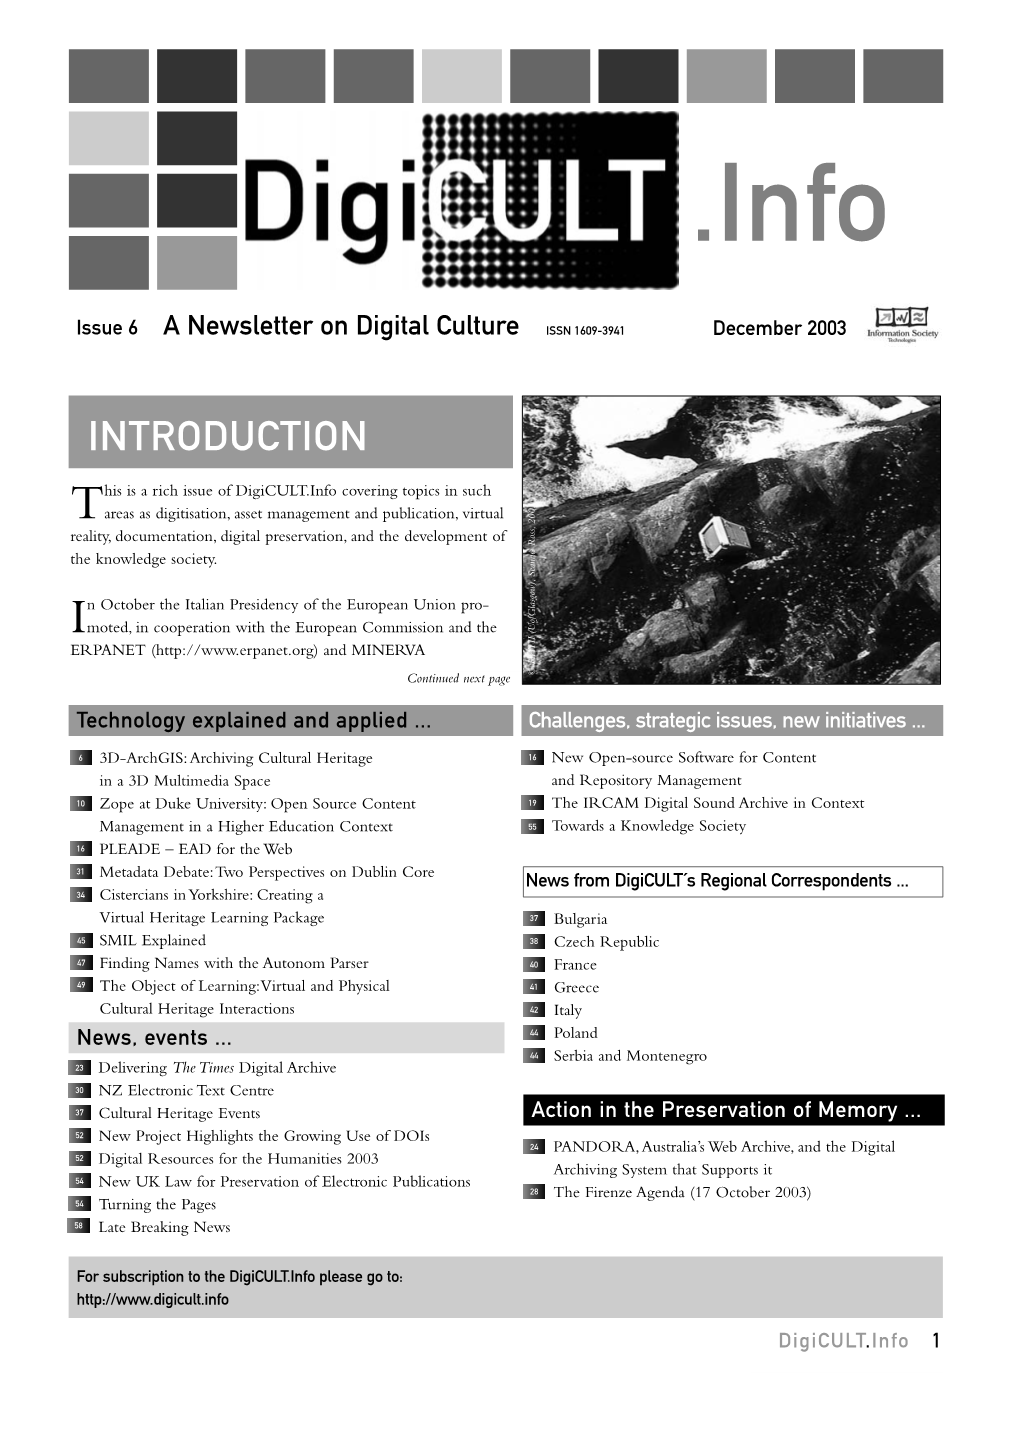 Digicult.Info Issue 6